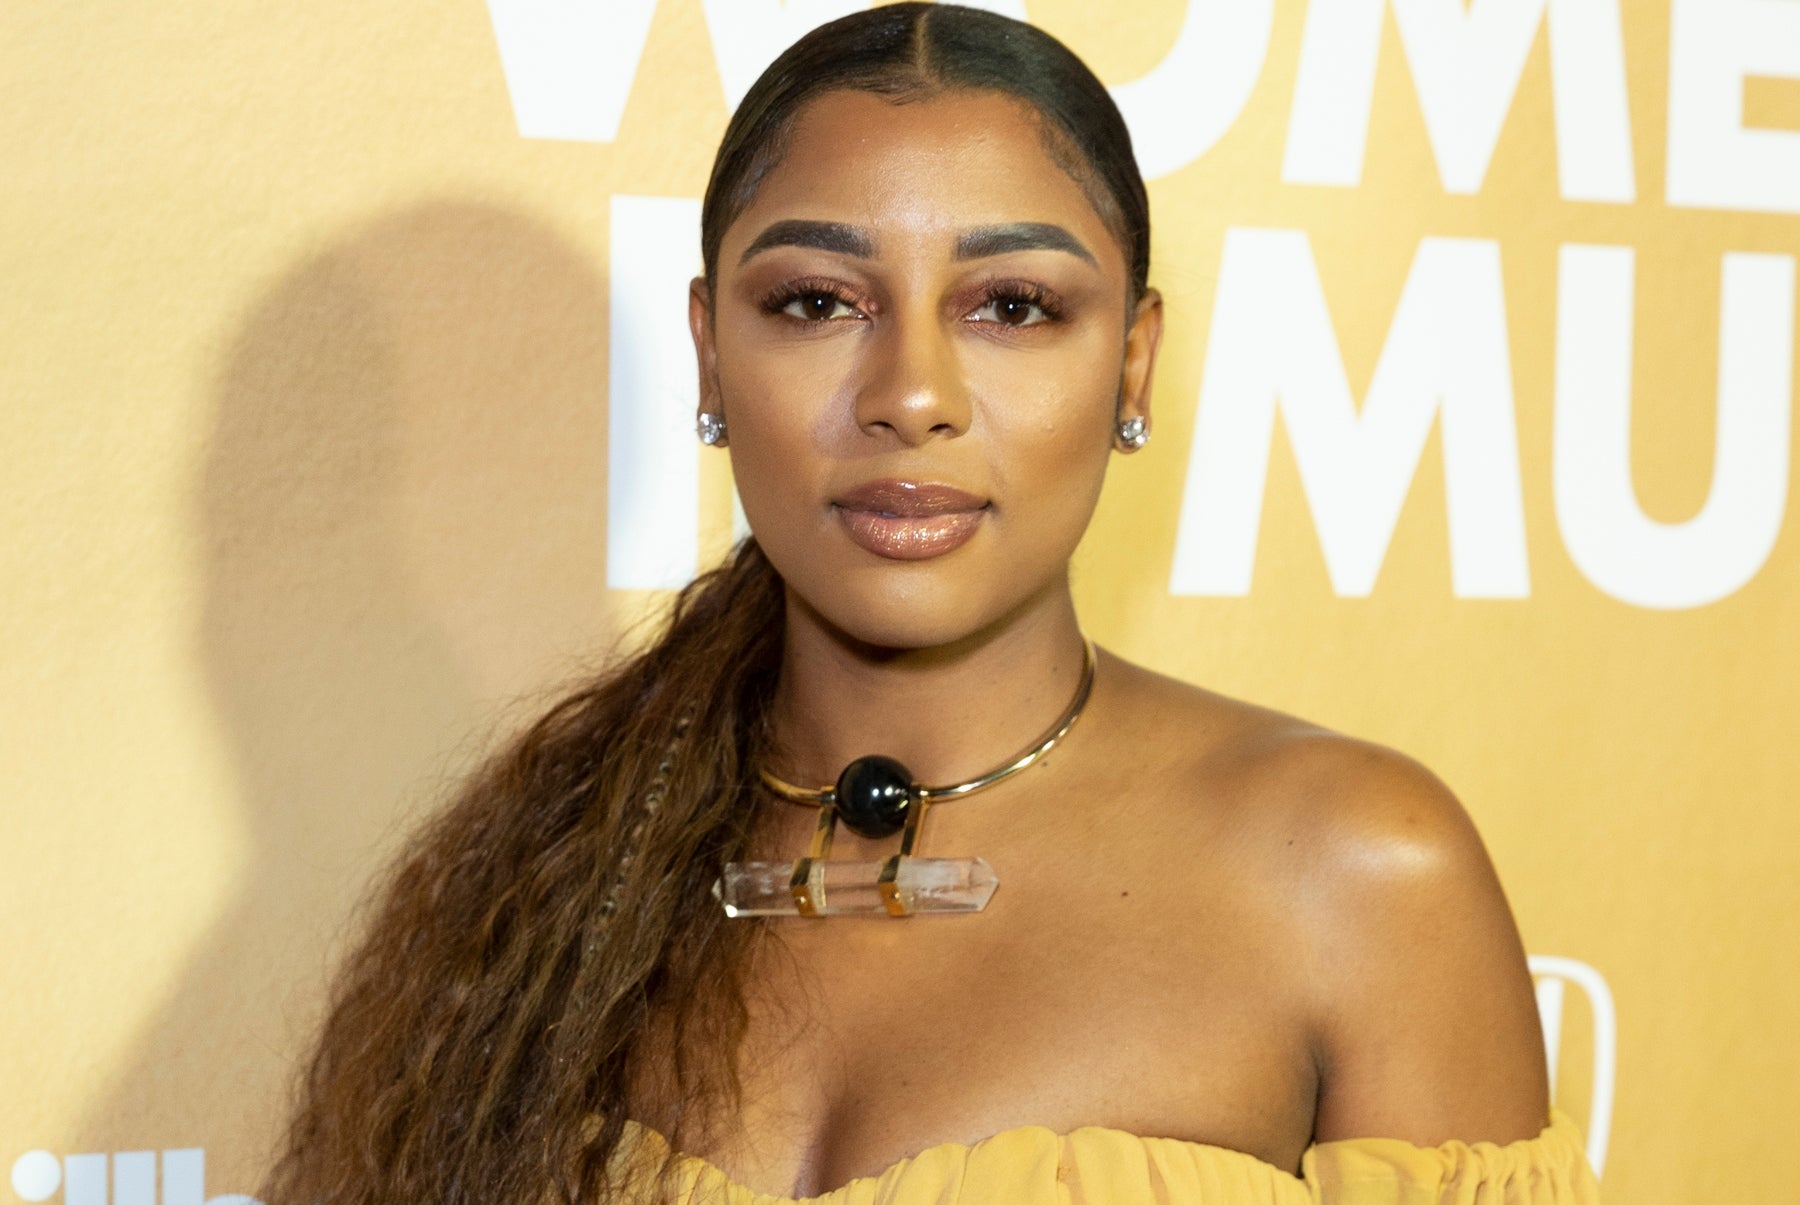 Singer Victoria Monét On Her Devastating Postpartum Hair Loss: ‘Probably Lost About 40% Of My Hair’